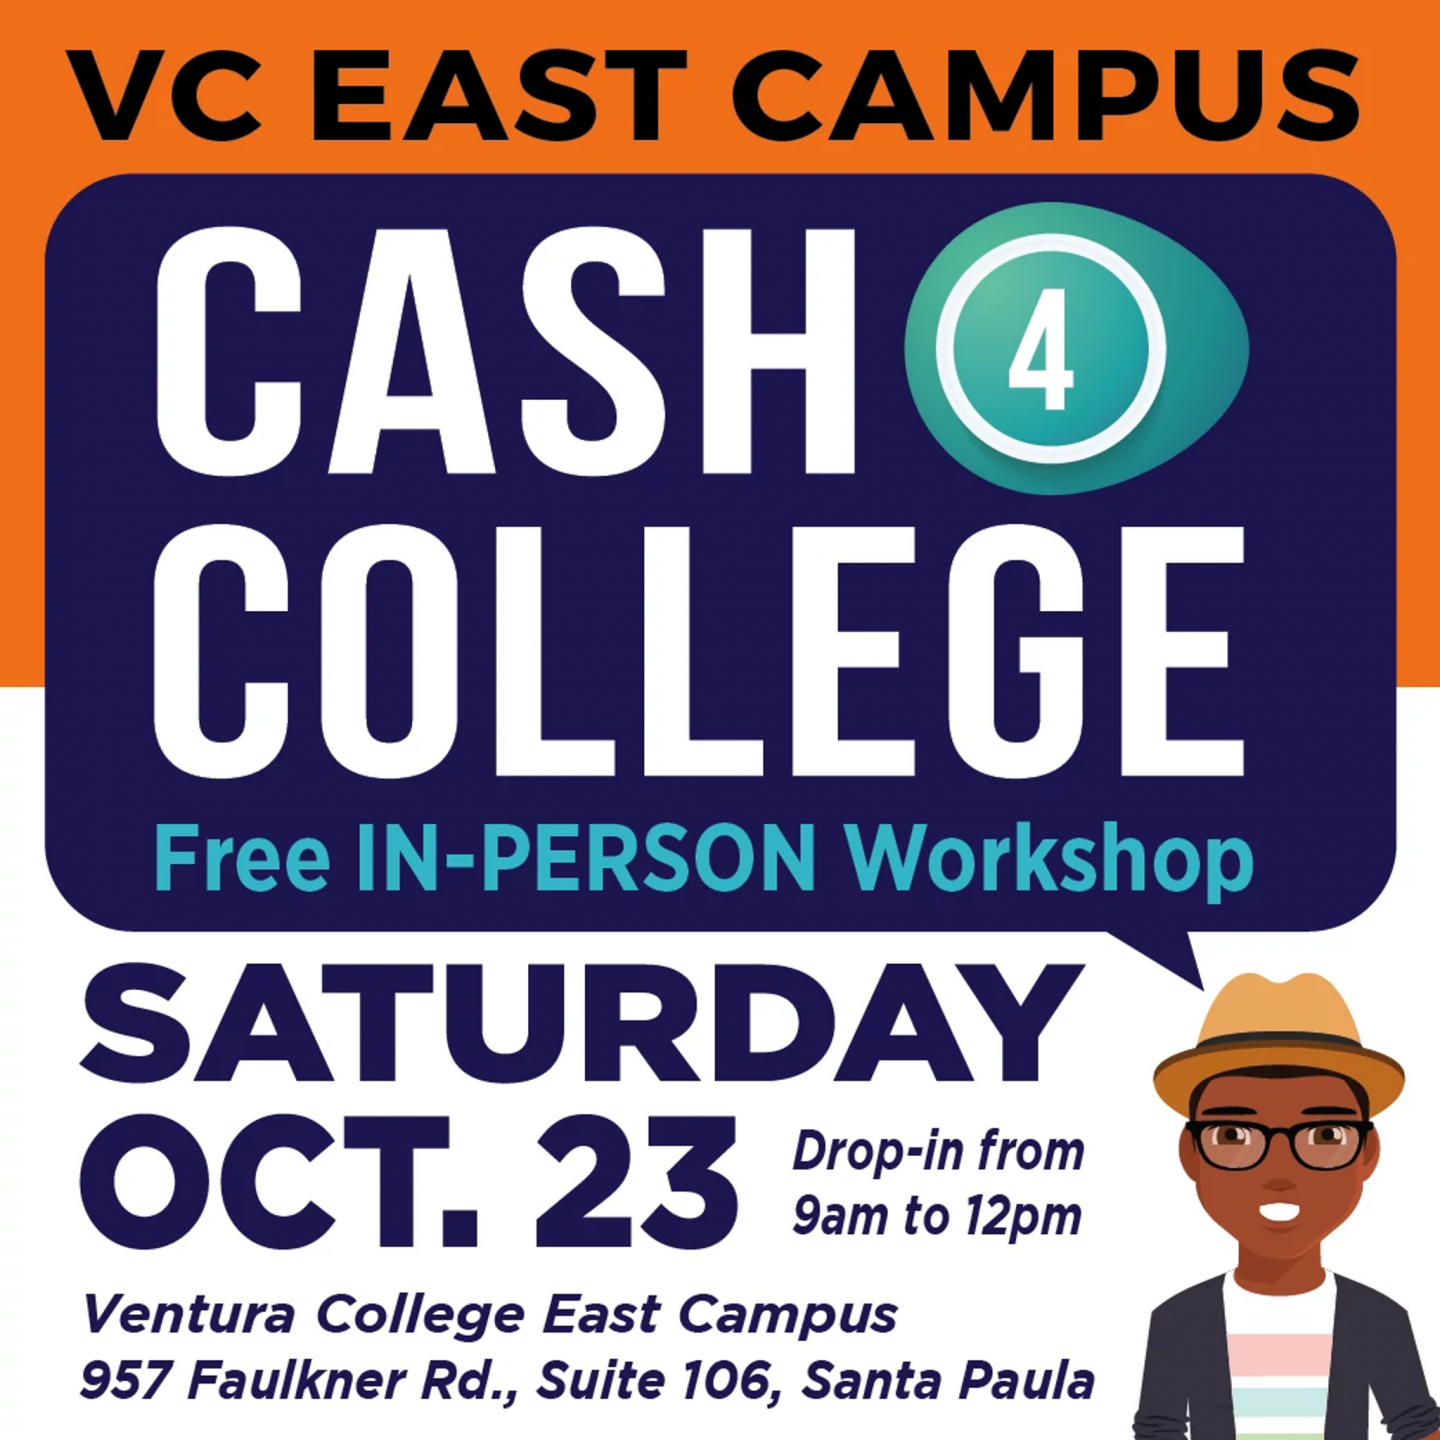 Cash for College at VC East Campus, Santa Paula, October 23th 9am-12pm